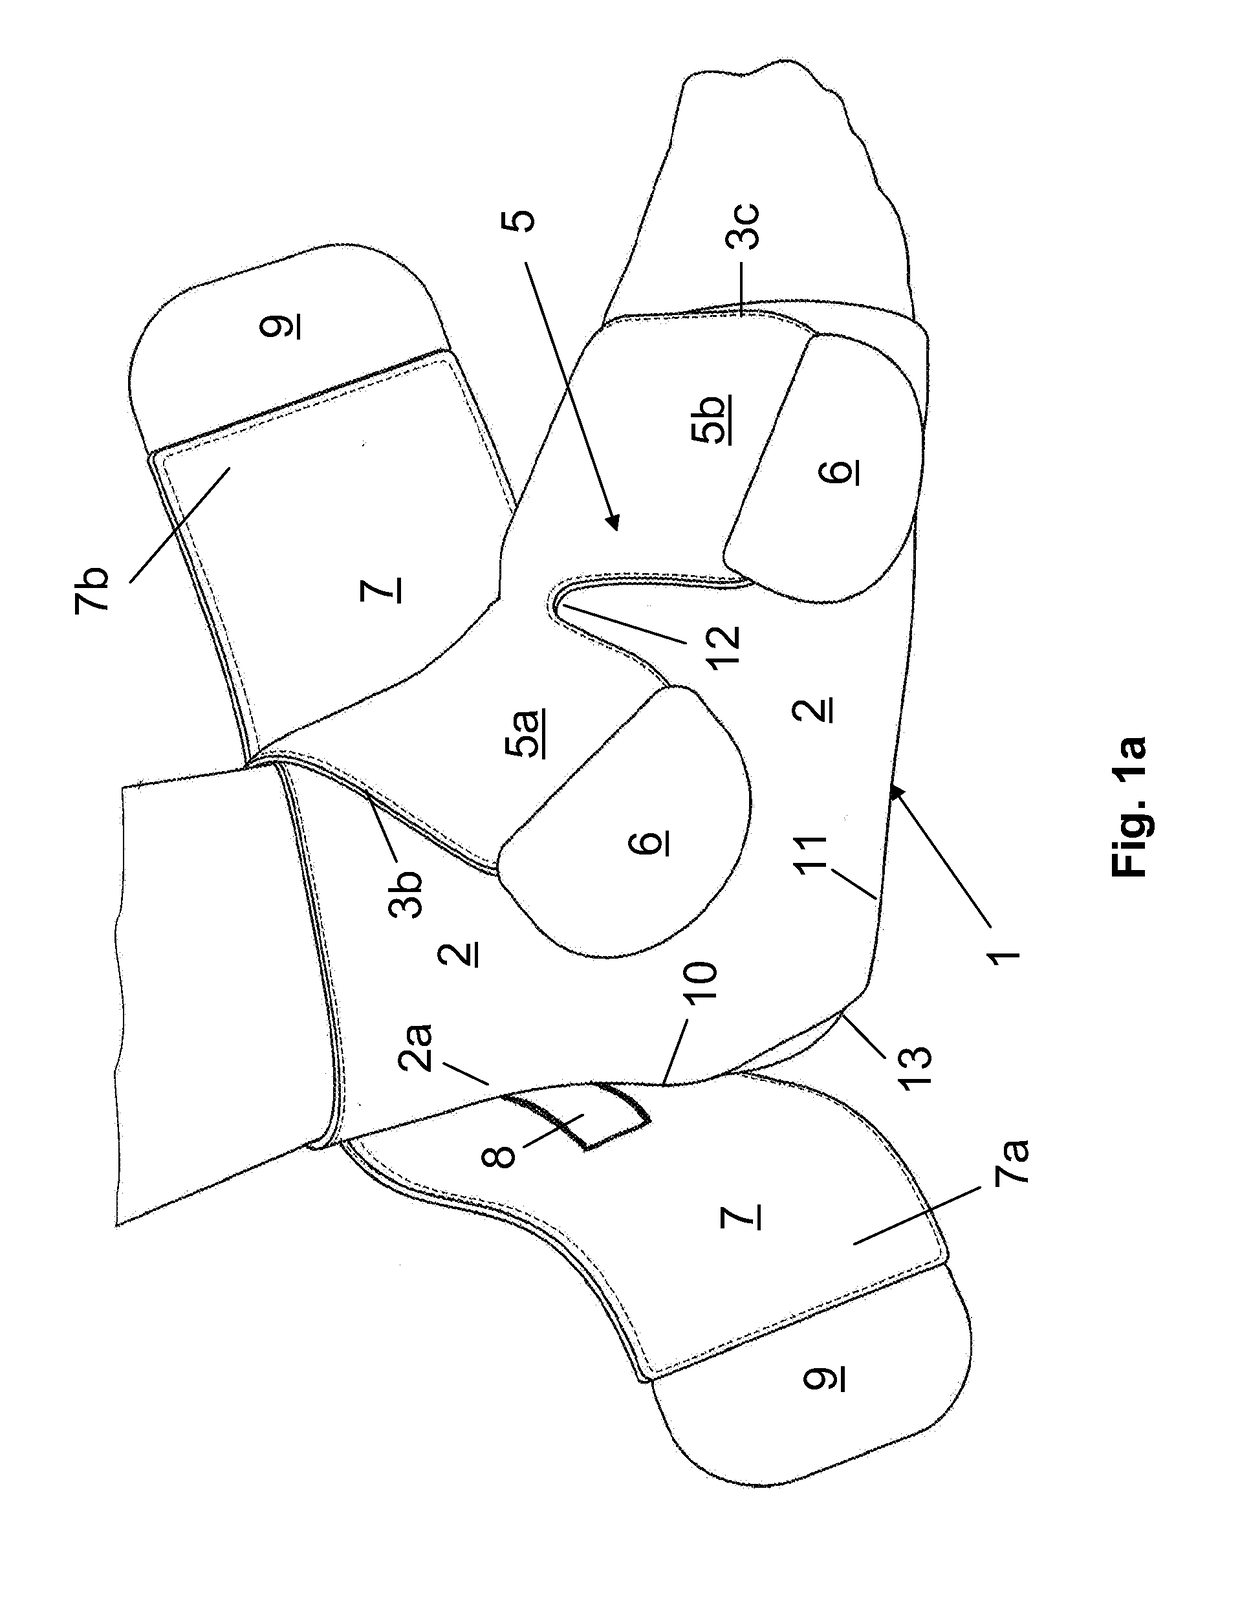 Foot bandage for compression therapy of lymphedema